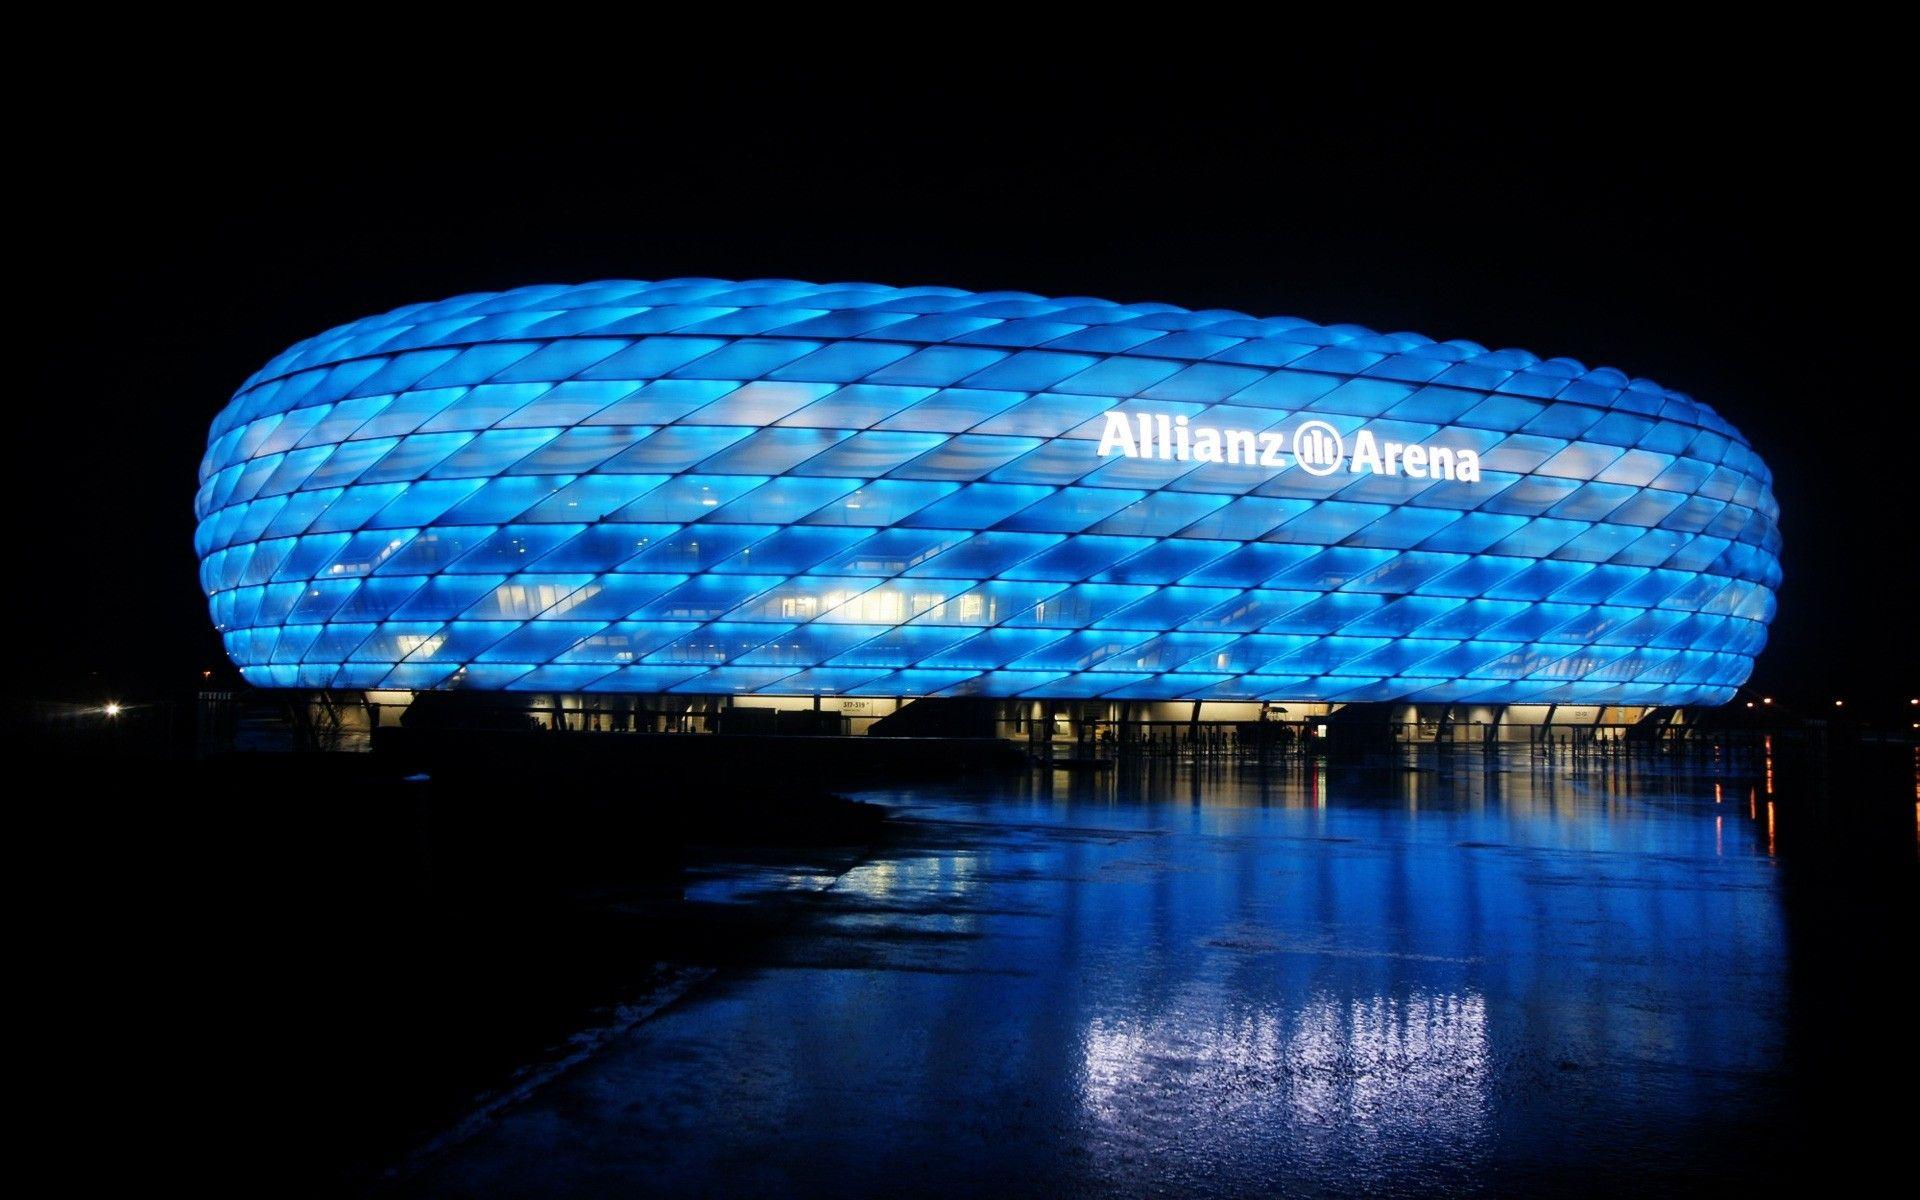 The Allianz Arena Munich. Android wallpaper for free